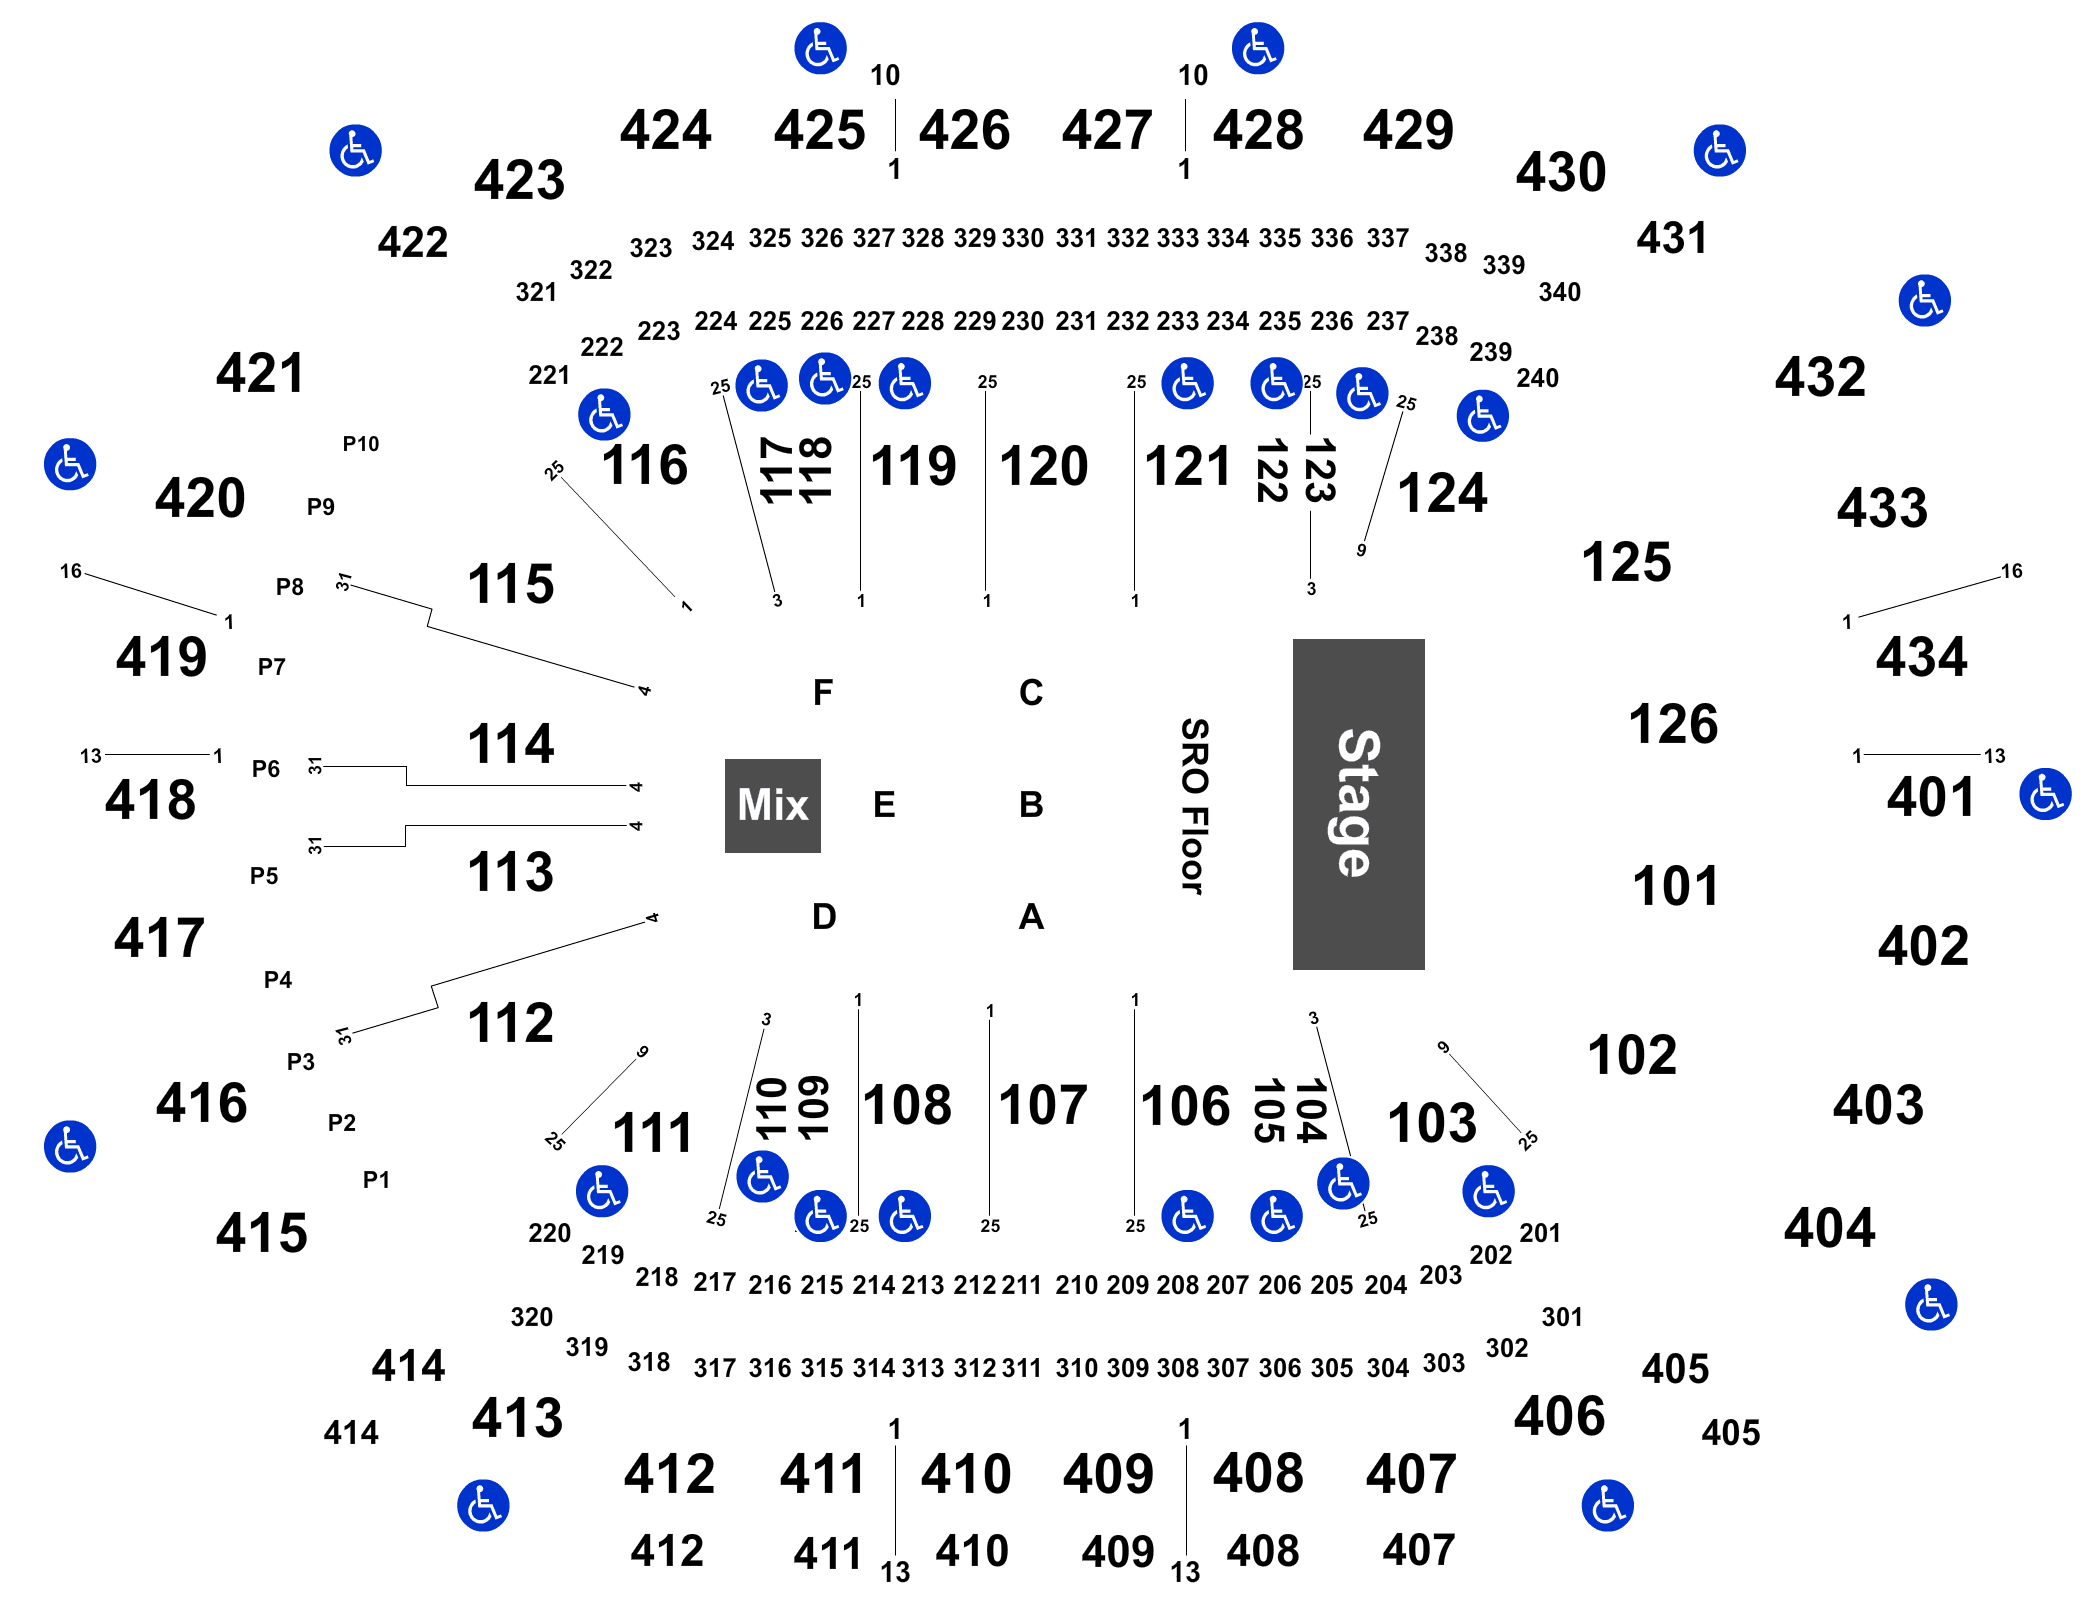 Details 101+ about toyota center seating chart best in.daotaonec